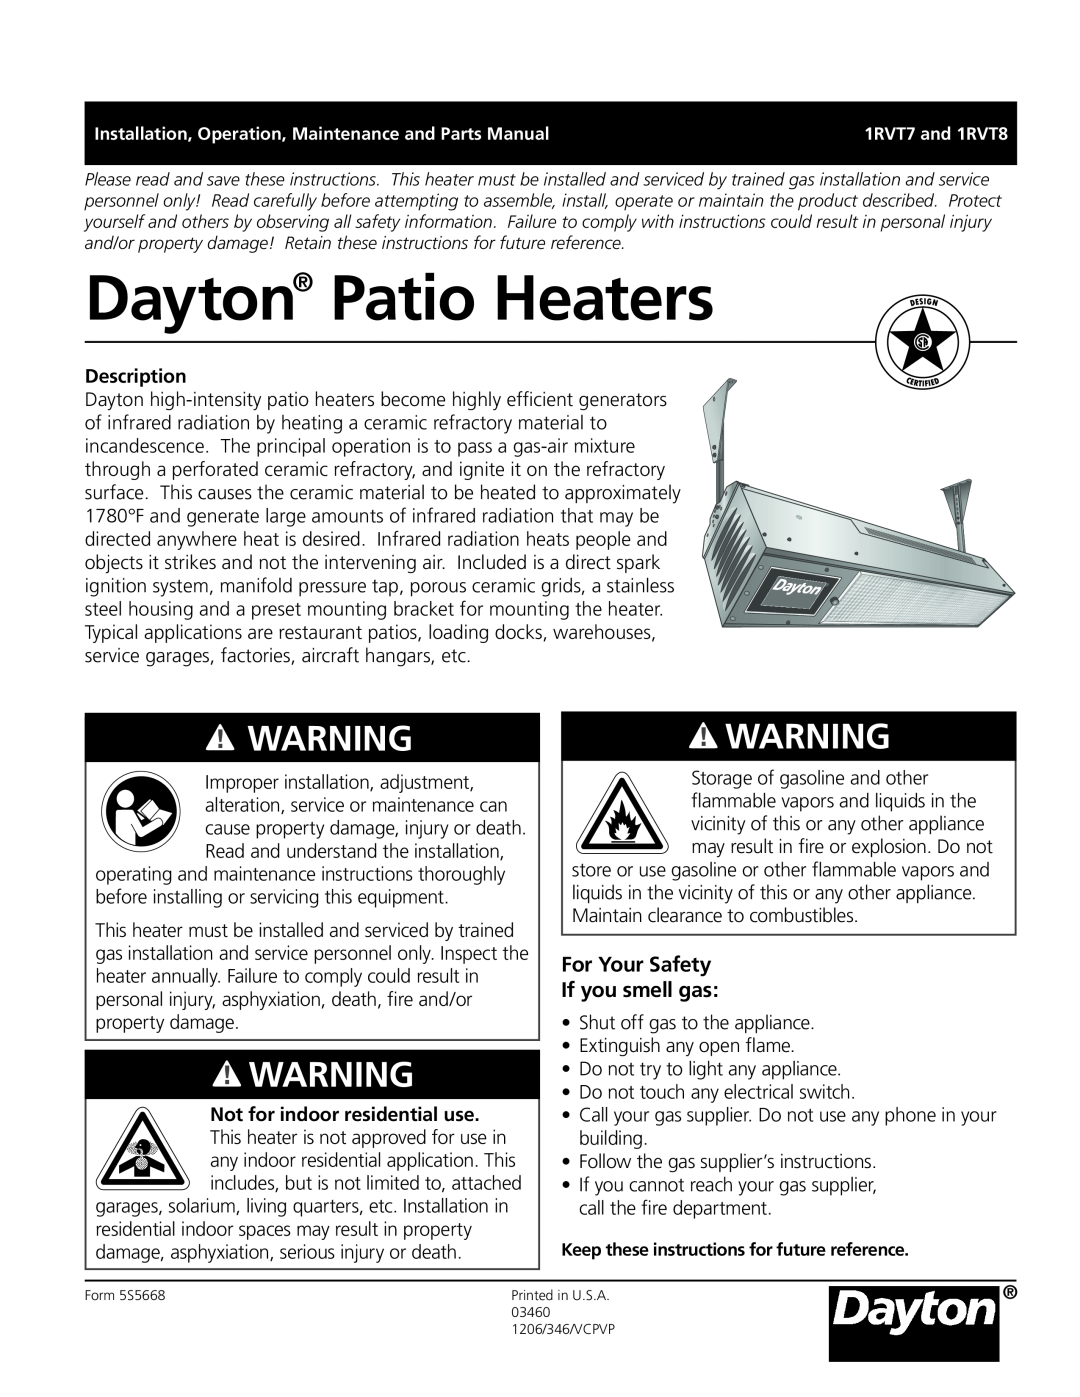 Dayton 1RVT7 manual For Your Safety If you smell gas, Dayton Patio Heaters, Description, Not for indoor residential use 